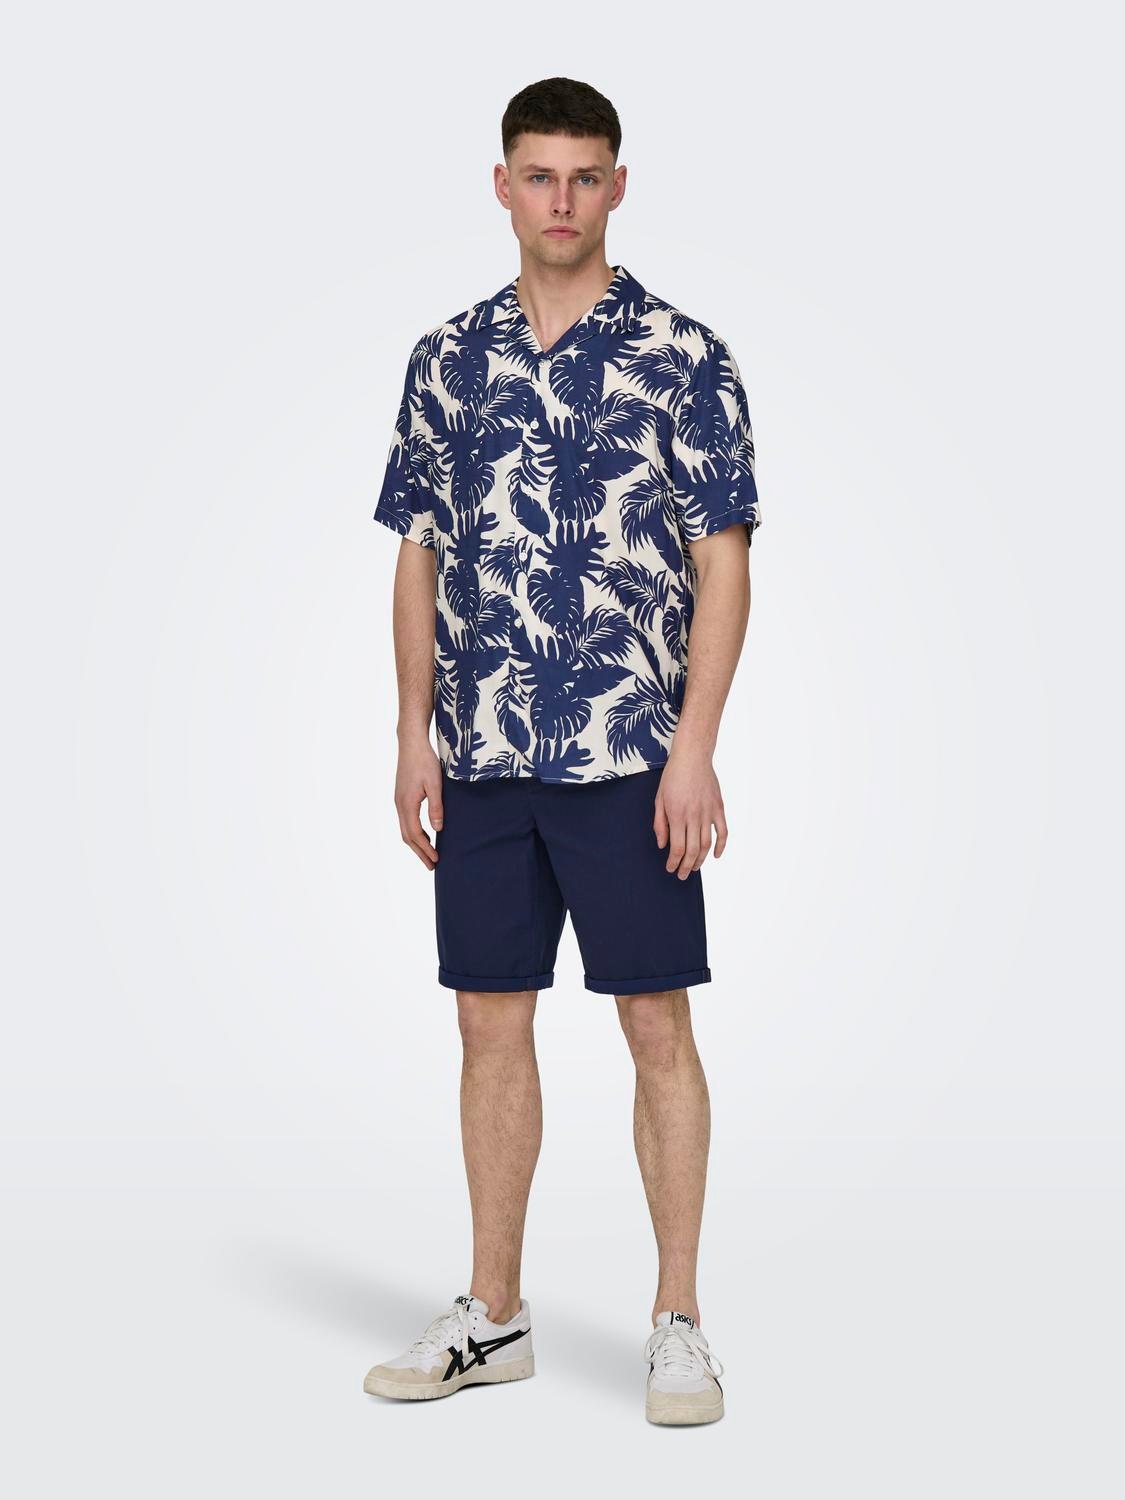 ONLY & SONS Normal passform Shorts -Dark Navy - 22028336